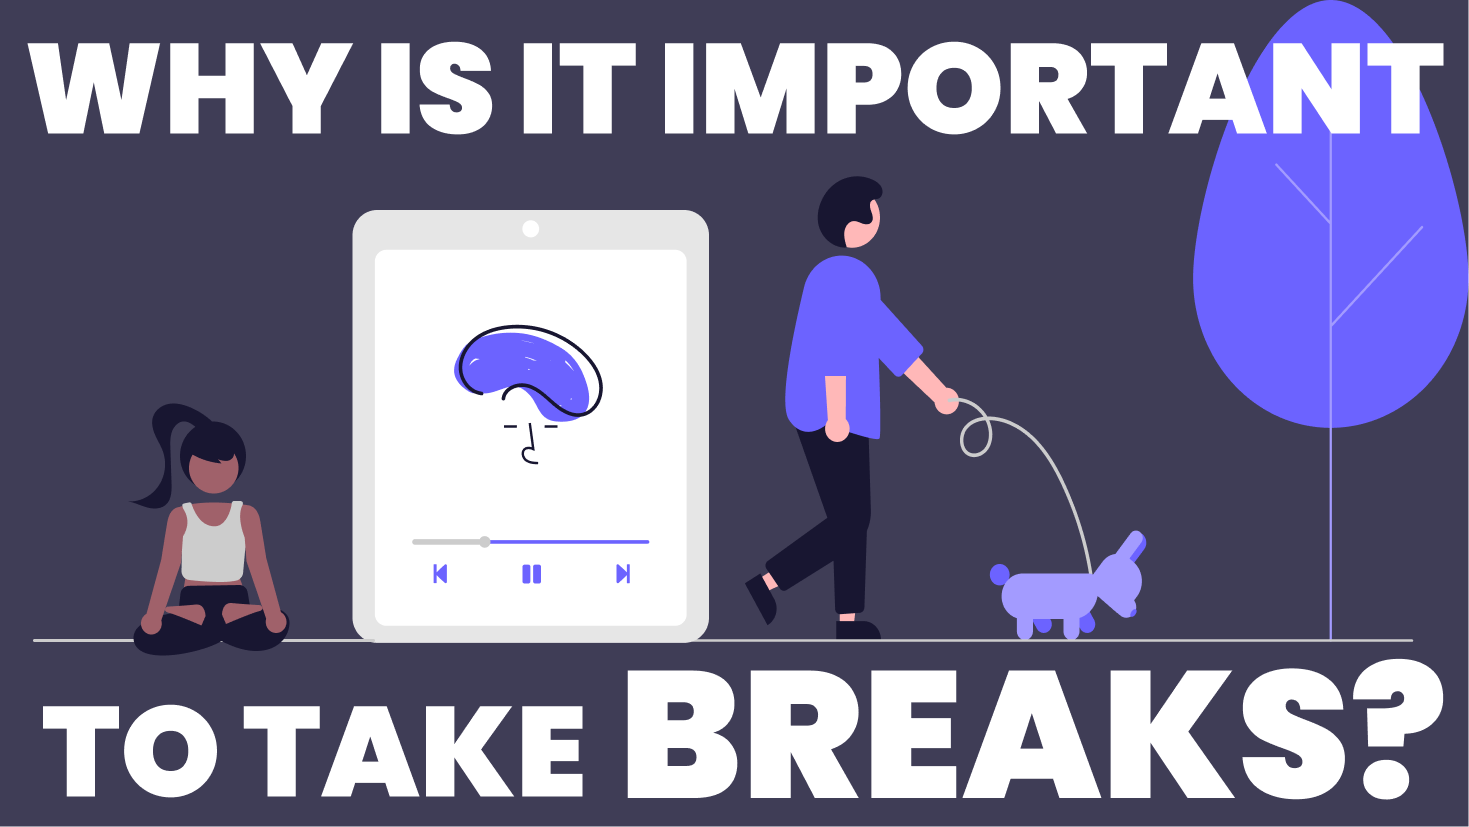 Why is it important to take breaks??